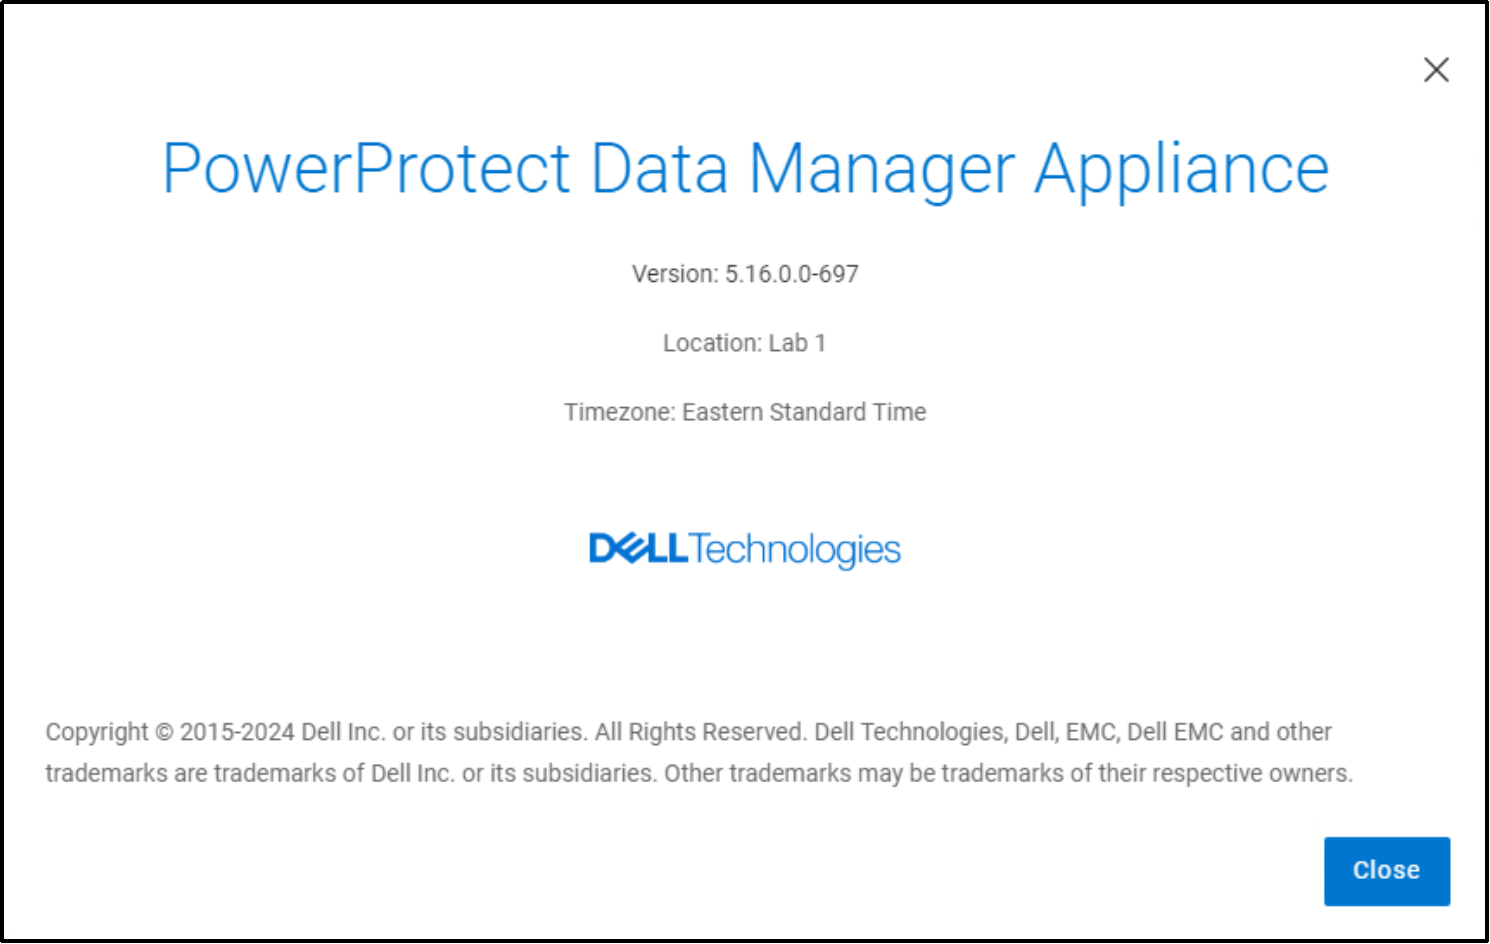 The image confirms that the PowerProtect Data Manager Appliance was upgraded to the latest version.